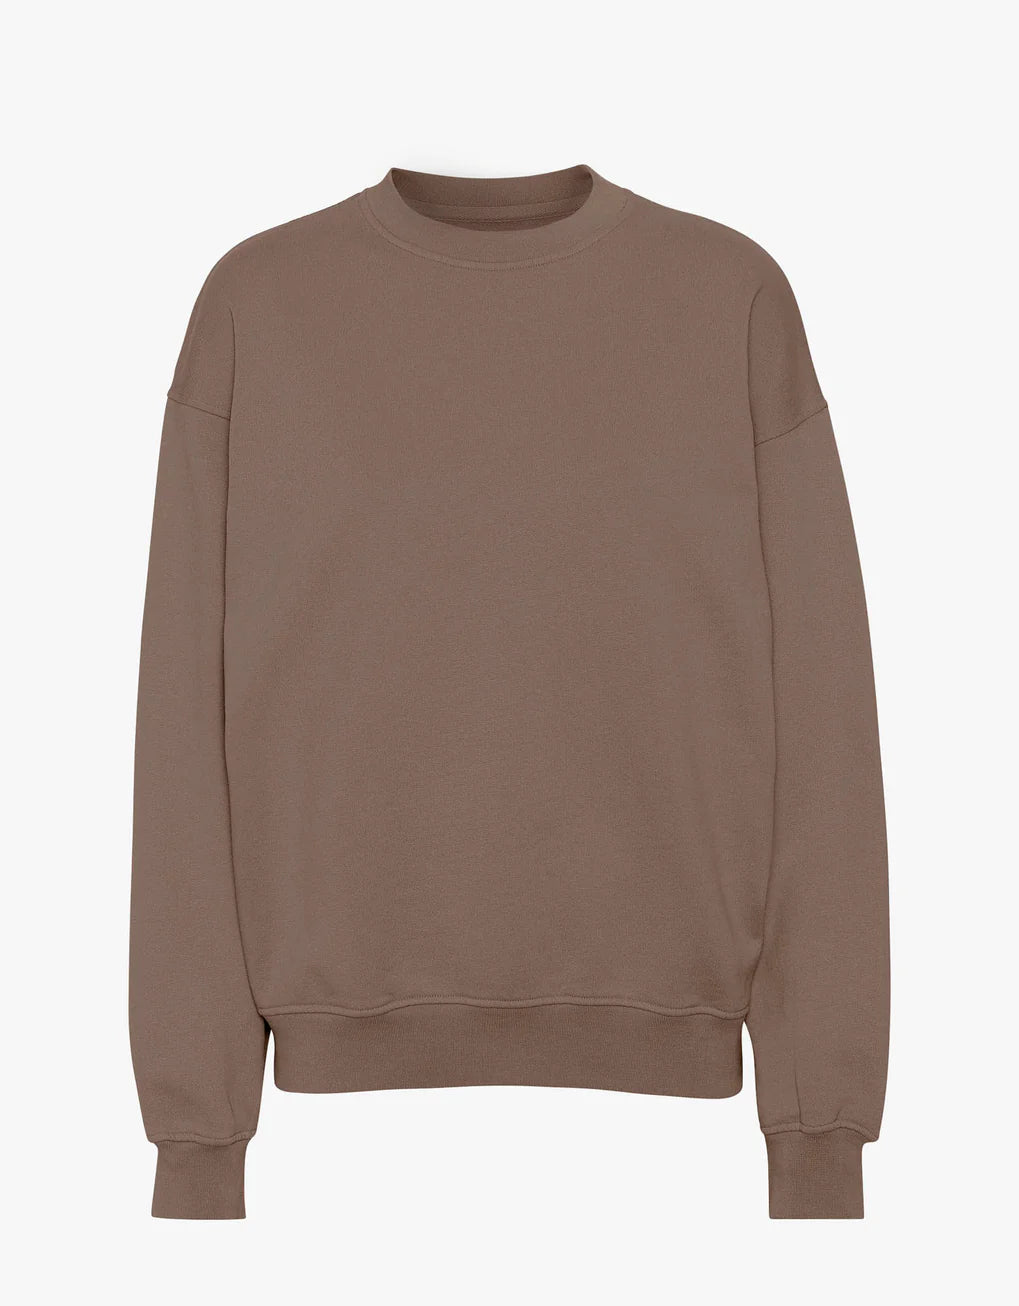 Organic oversized crew in warm taupe by Colorful Standard